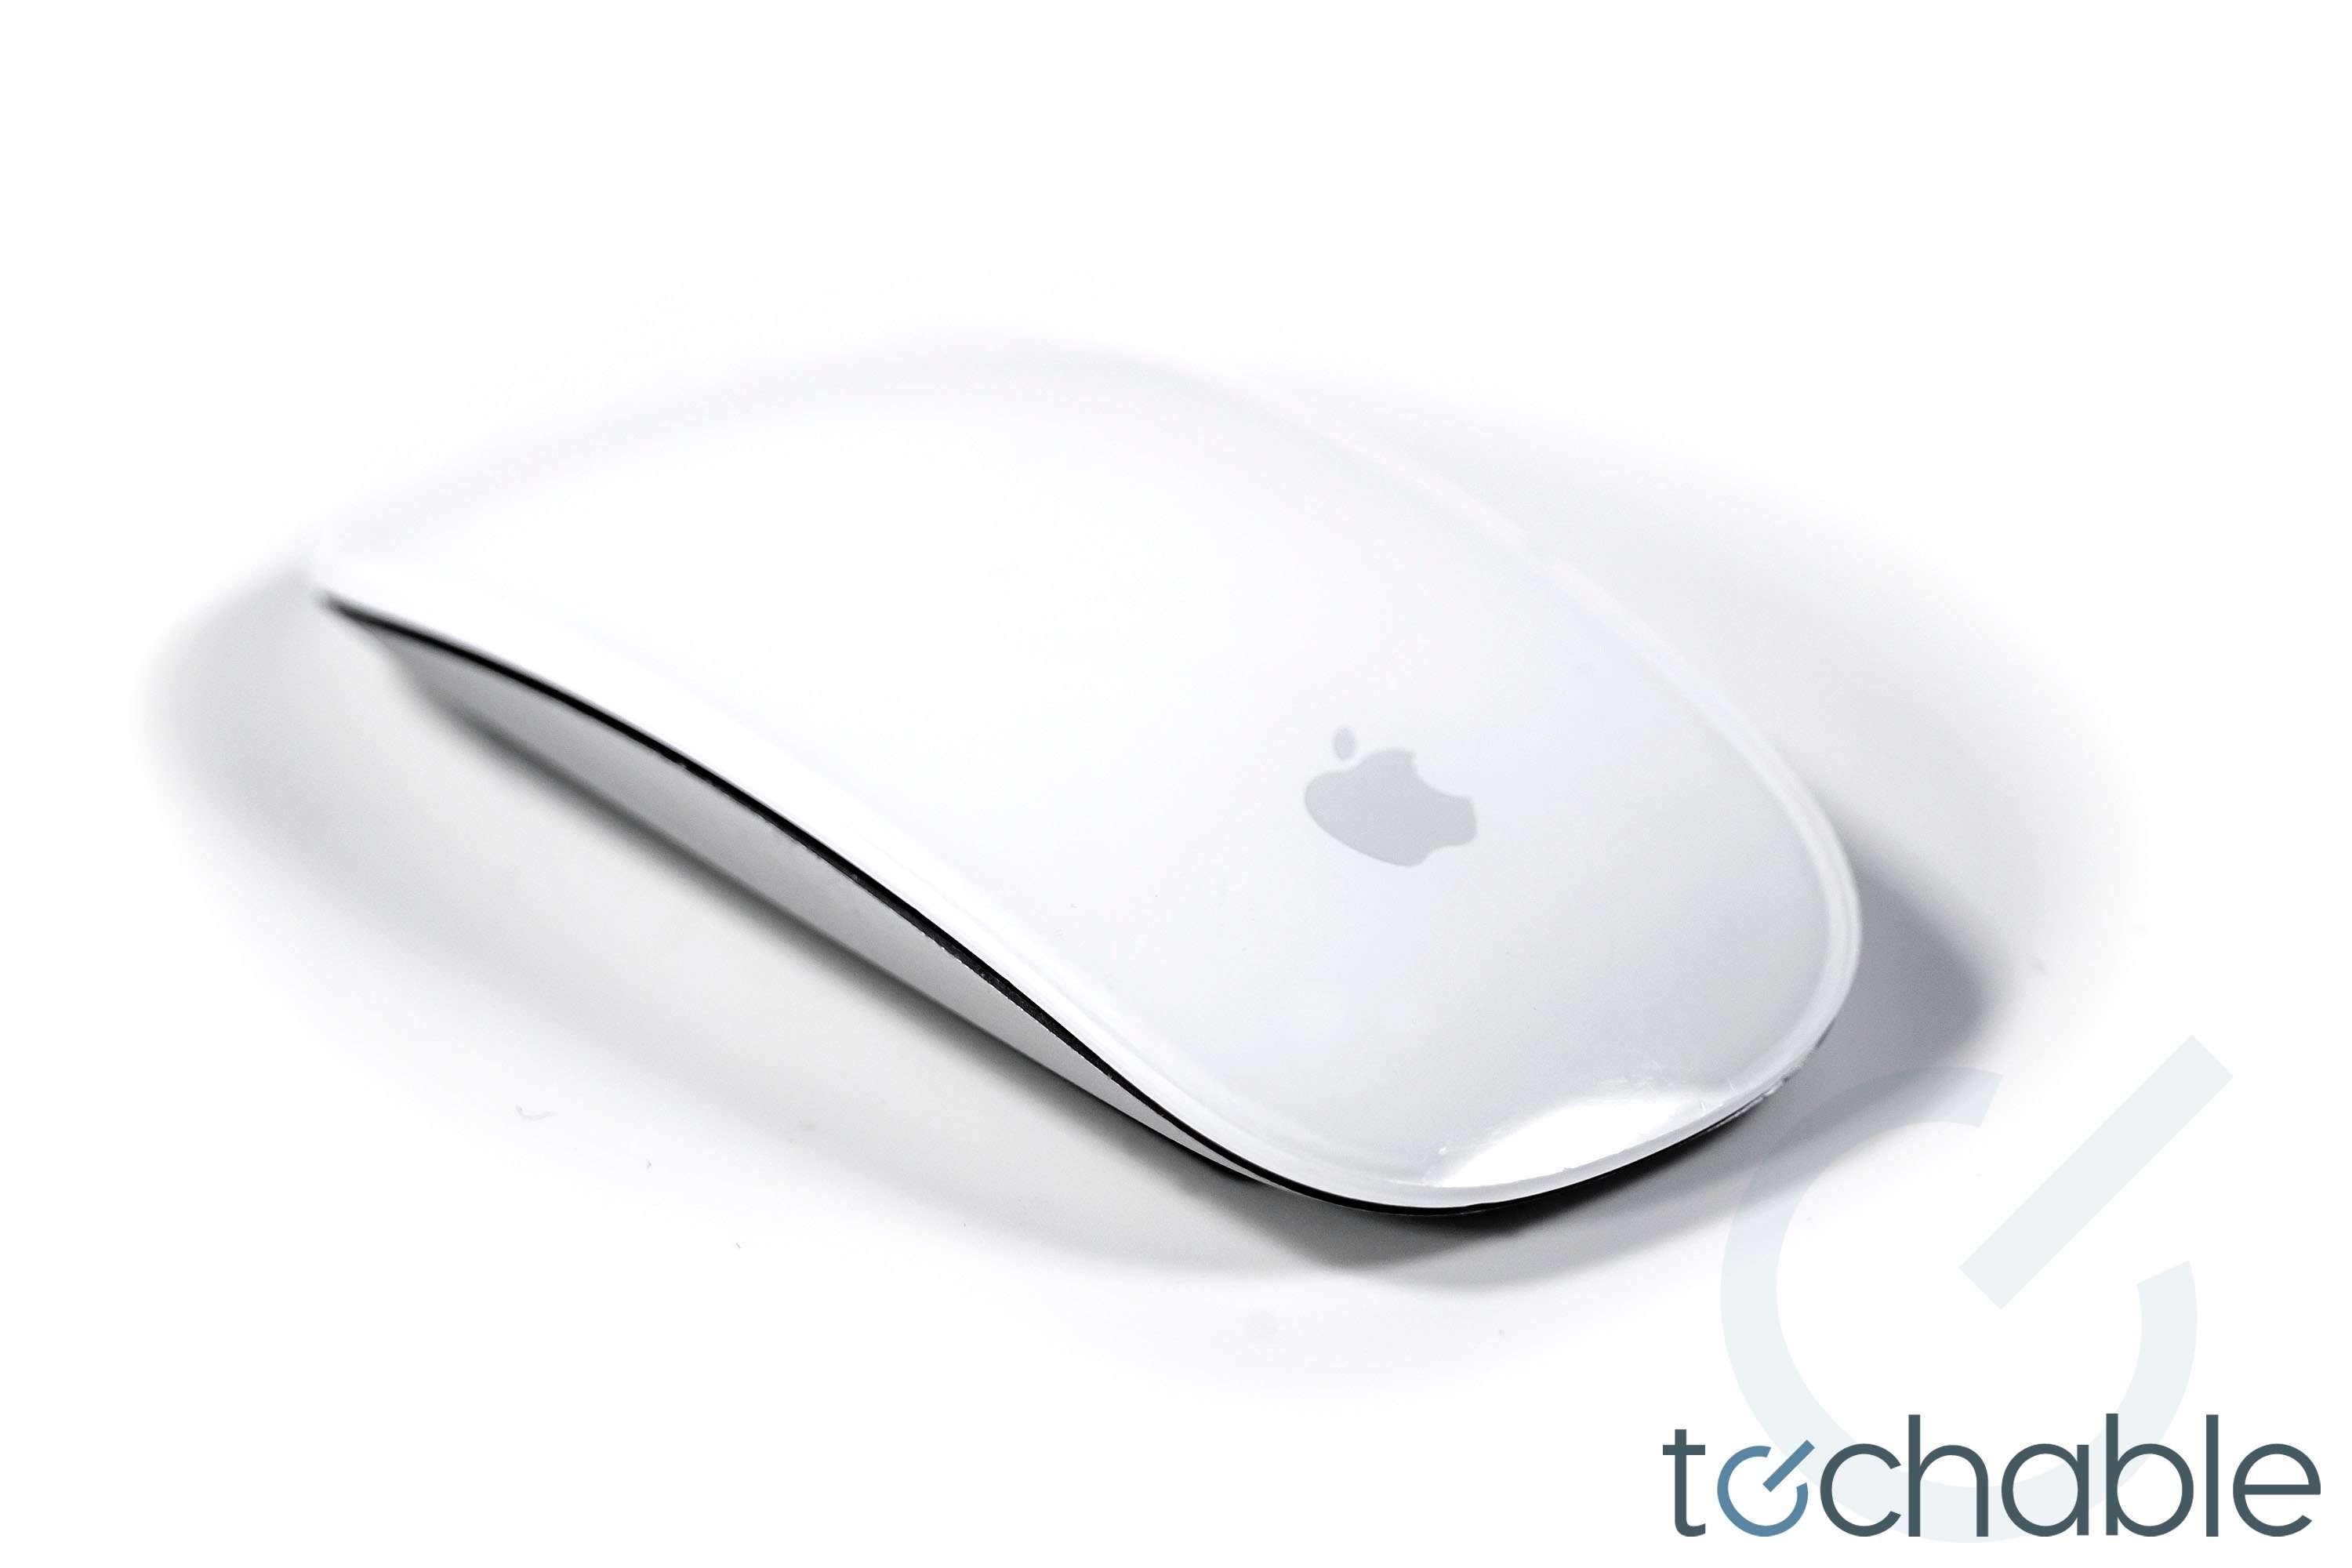 GR_A WIRELESS BLUETOOTH MAGIC MOUSE 2 SPACE GRAY + LIGHTNING CABLE - A1657